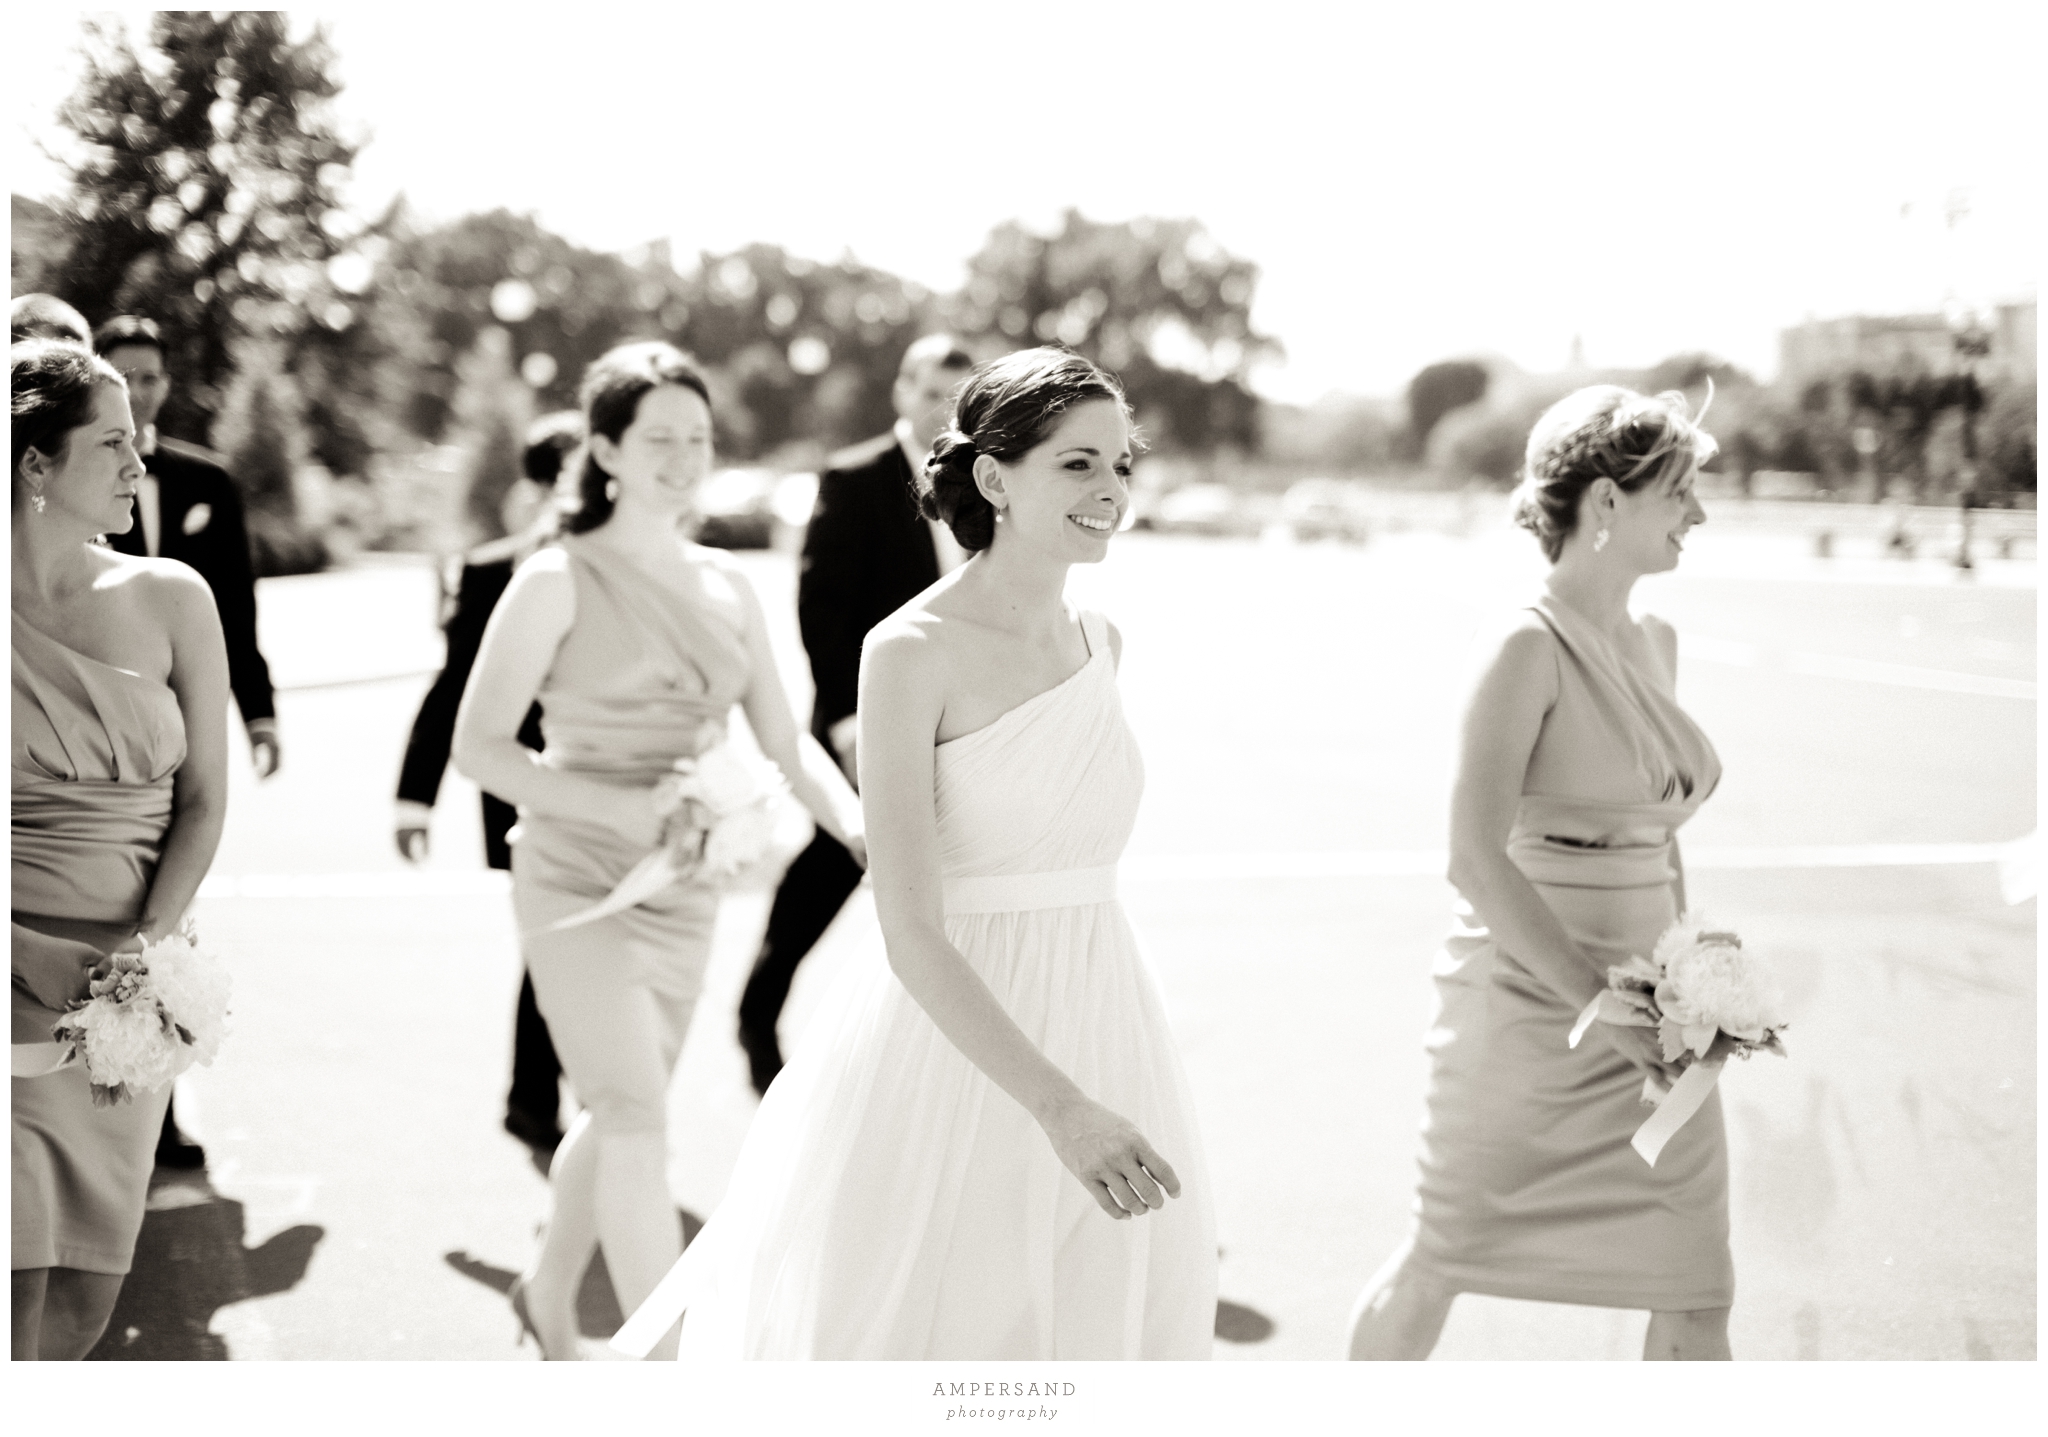 Wedding party  // Photos by Ampersand Photography